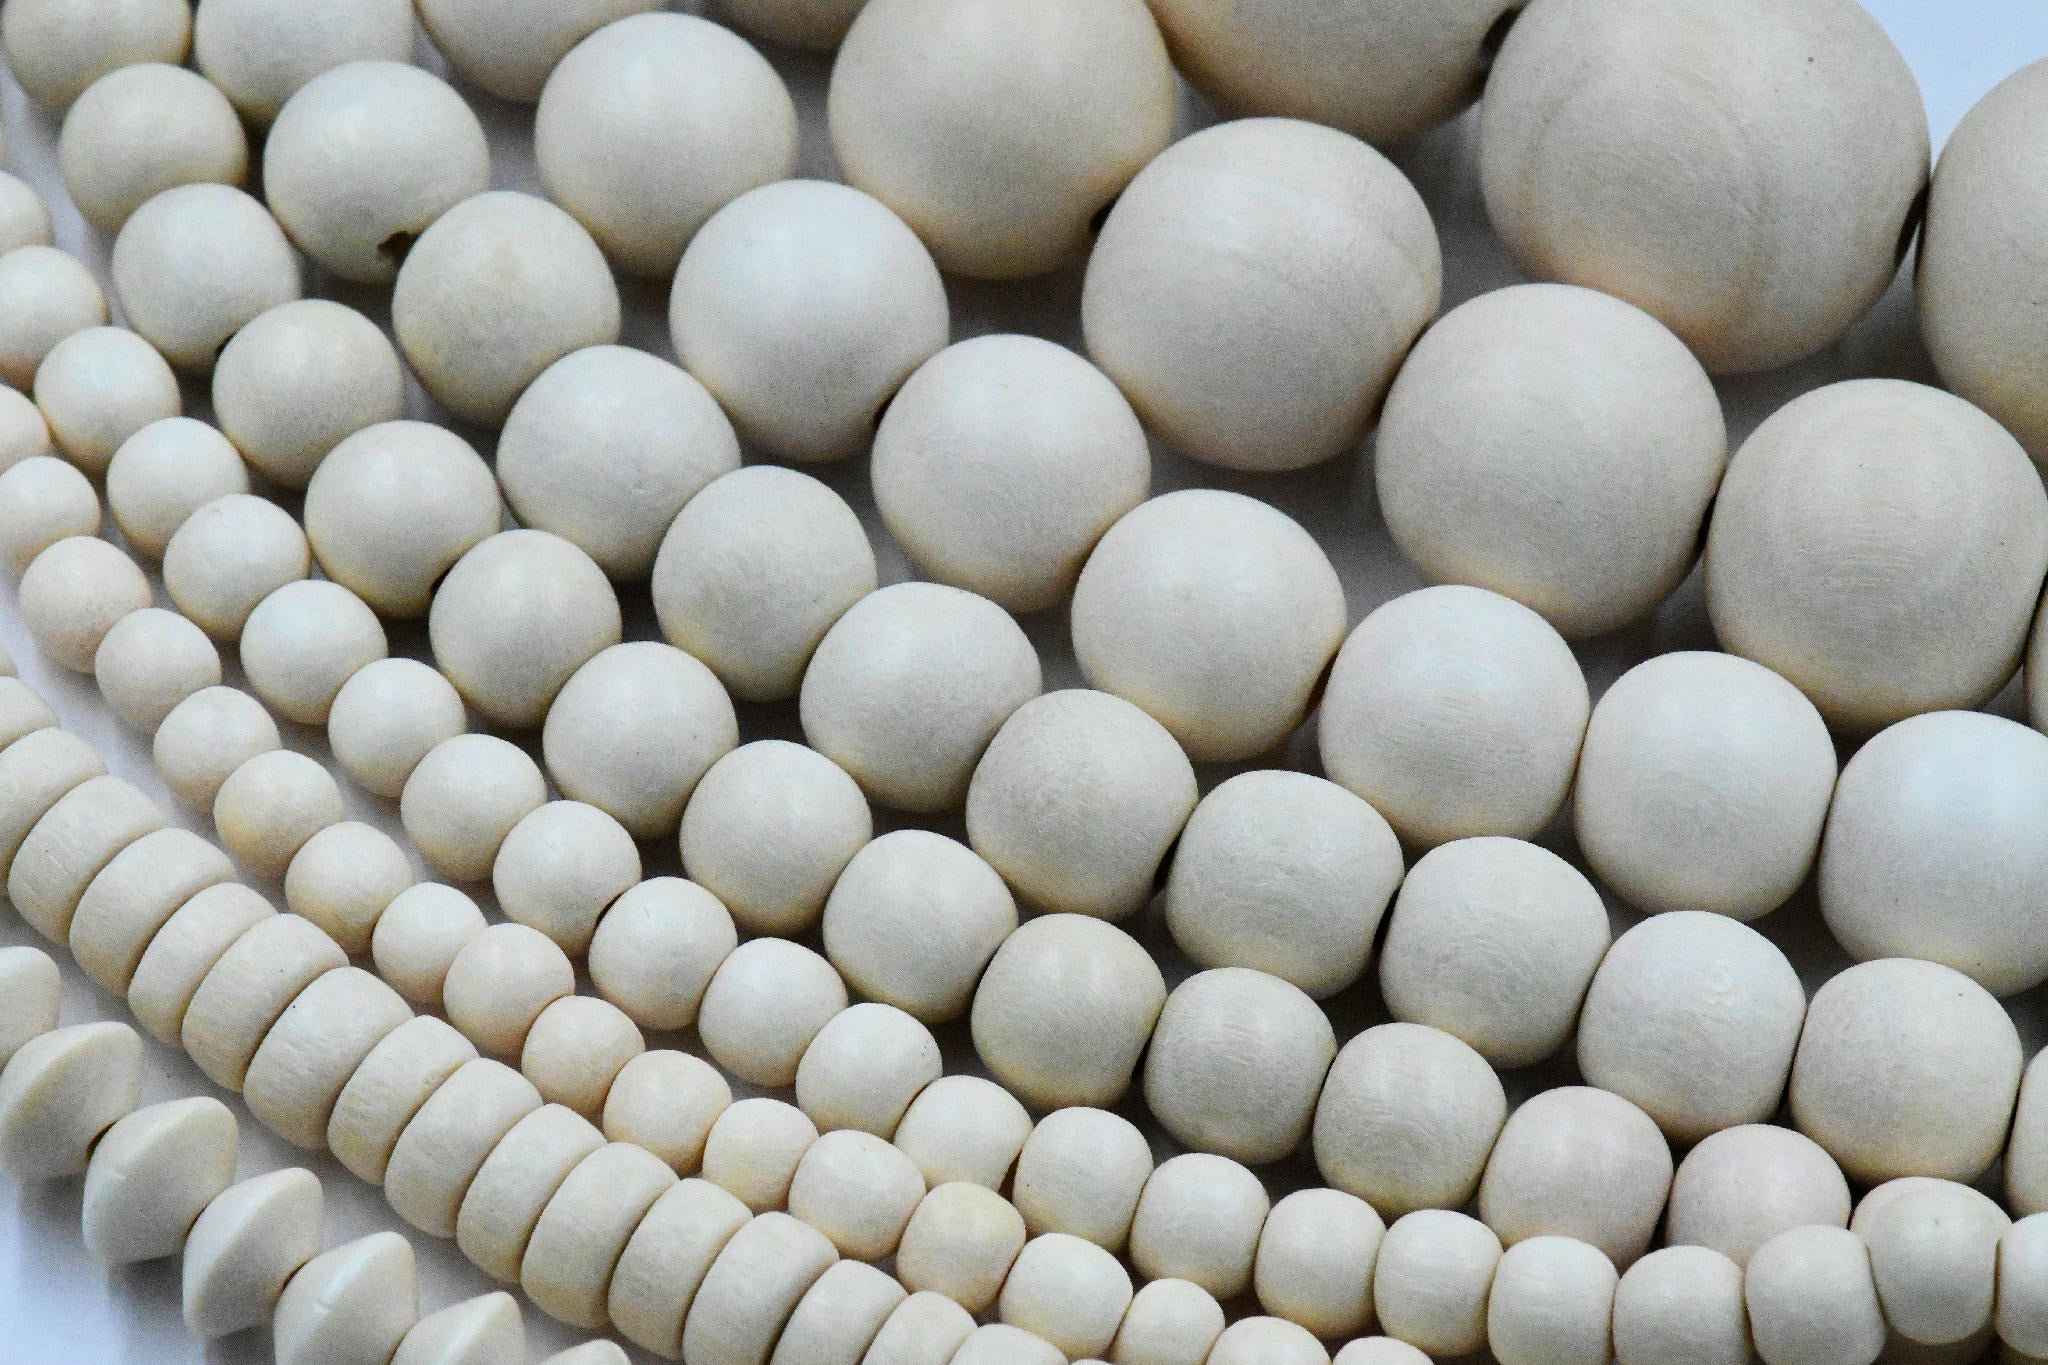 100 Painted White Wood Beads 20mm with 3mm Hole